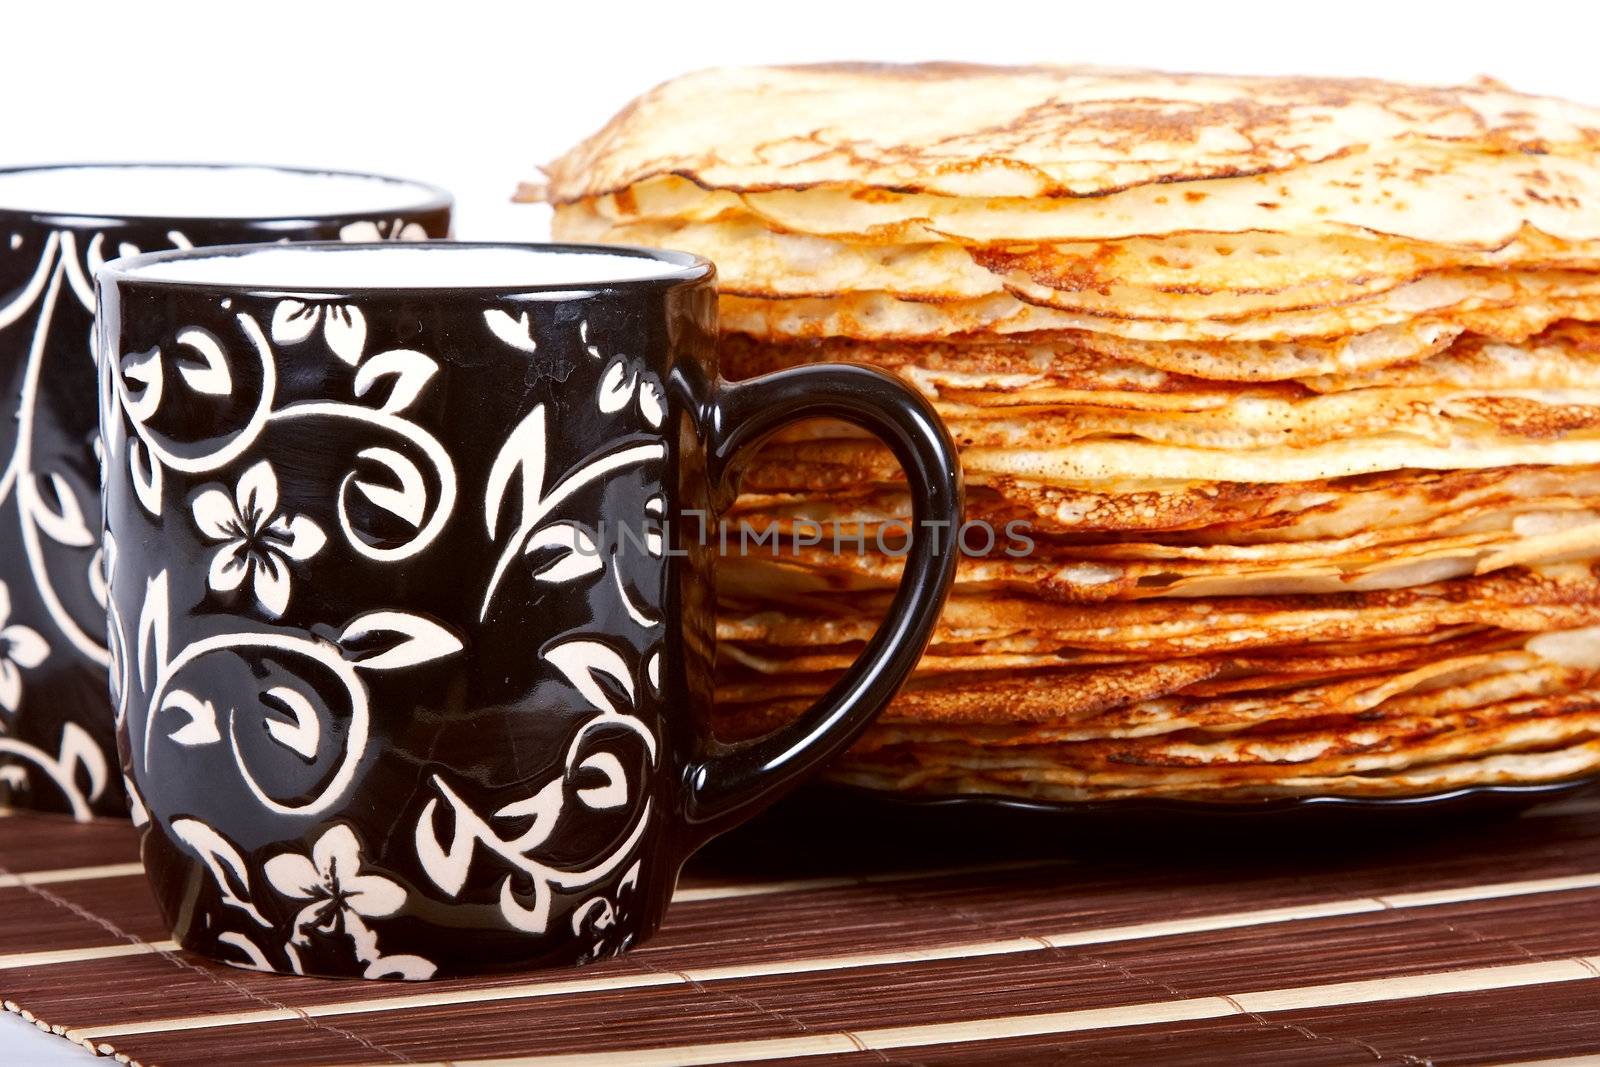 Cups with tea and a pile of pancakes on a plate